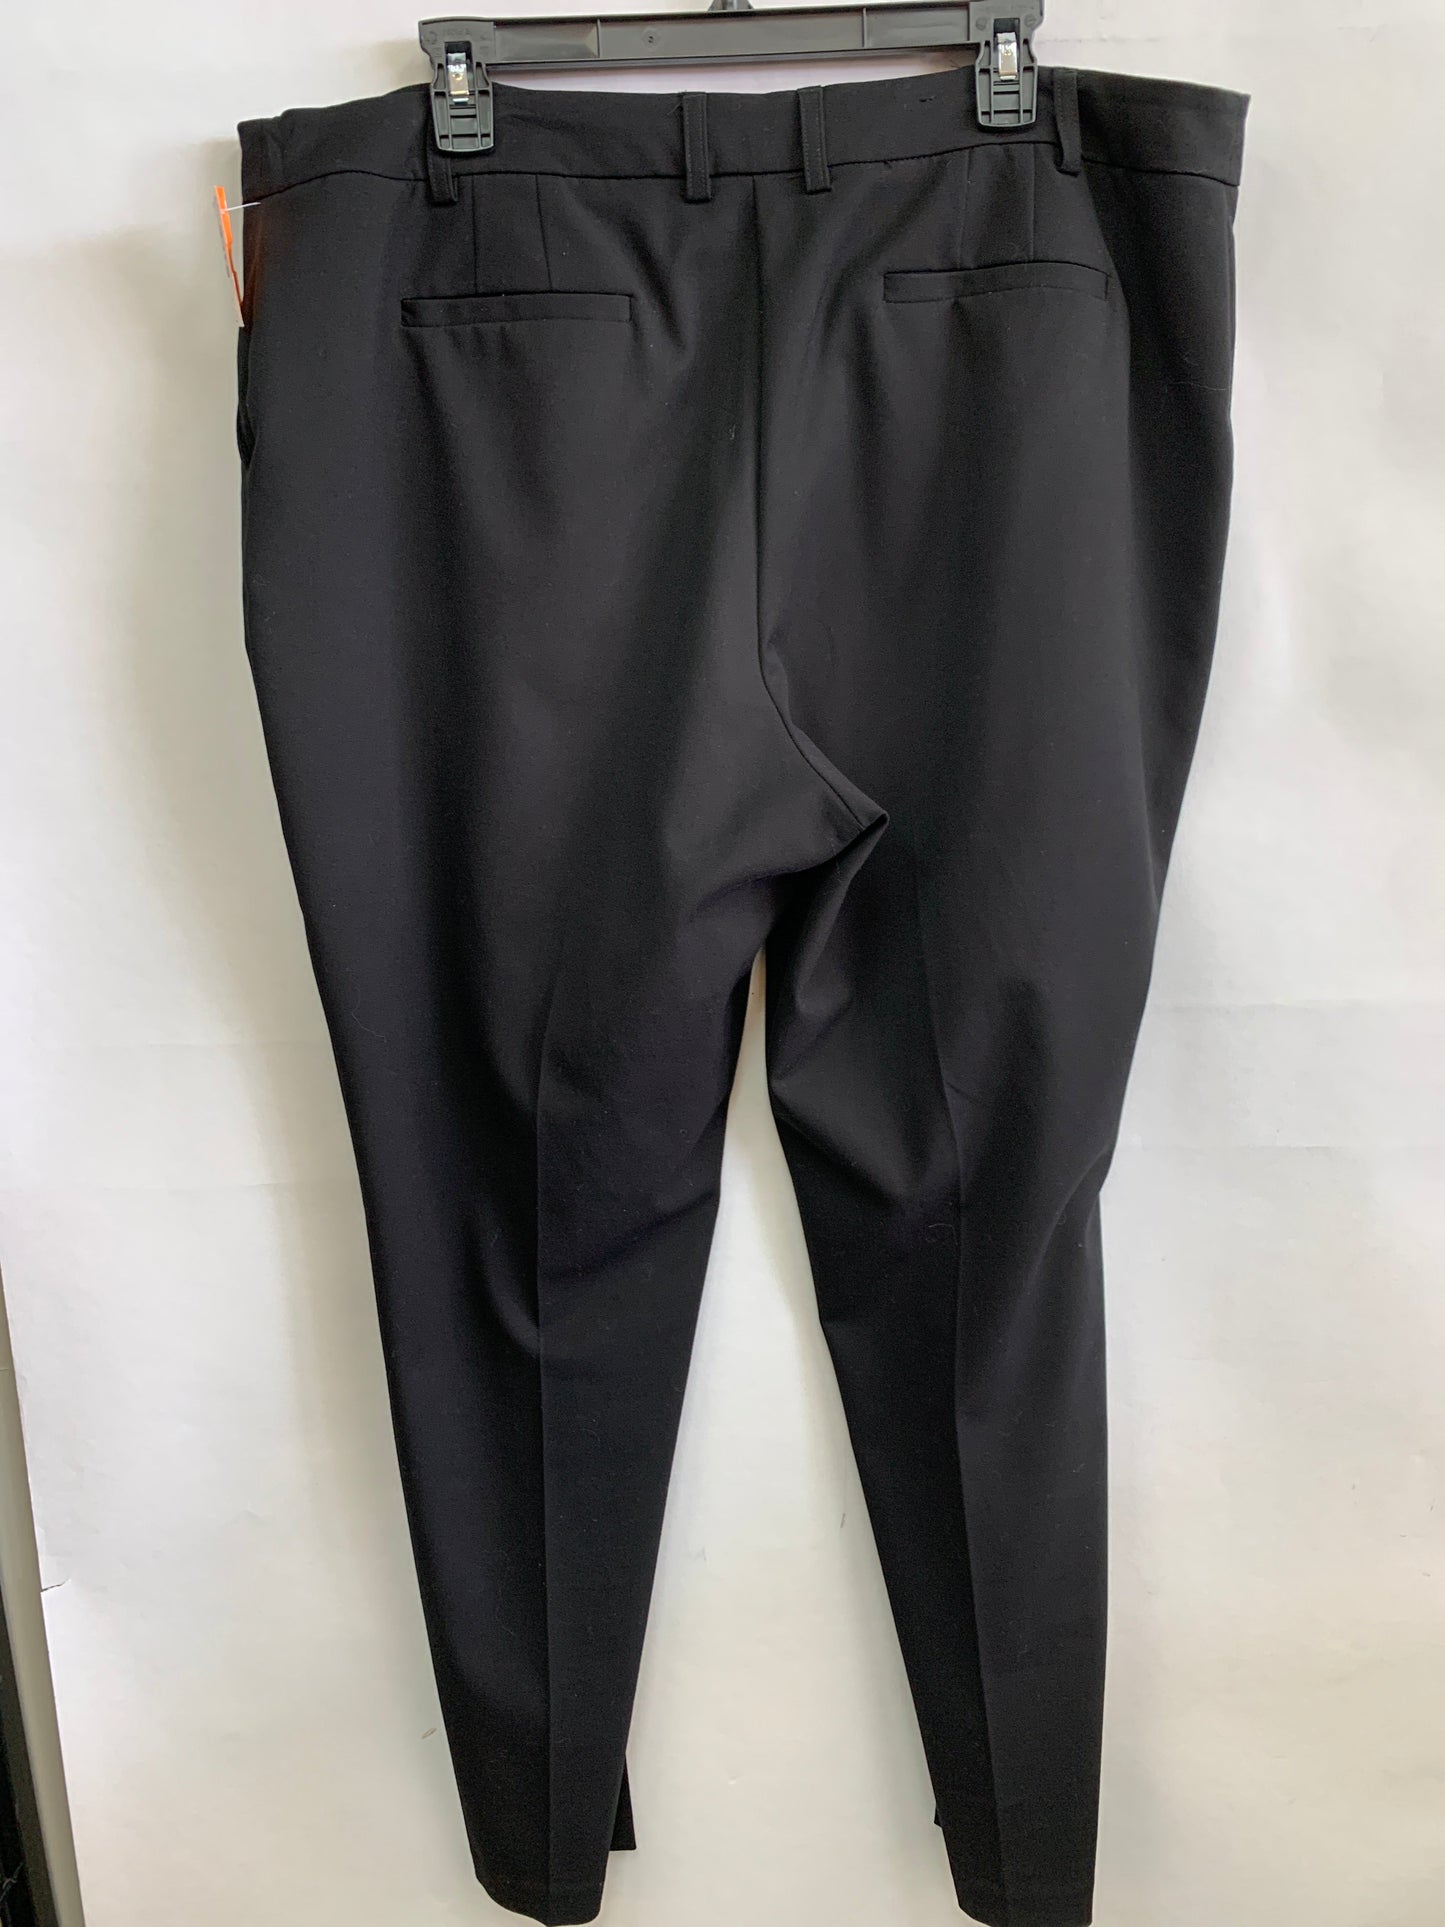 Pants Ankle By Jones New York  Size: 16